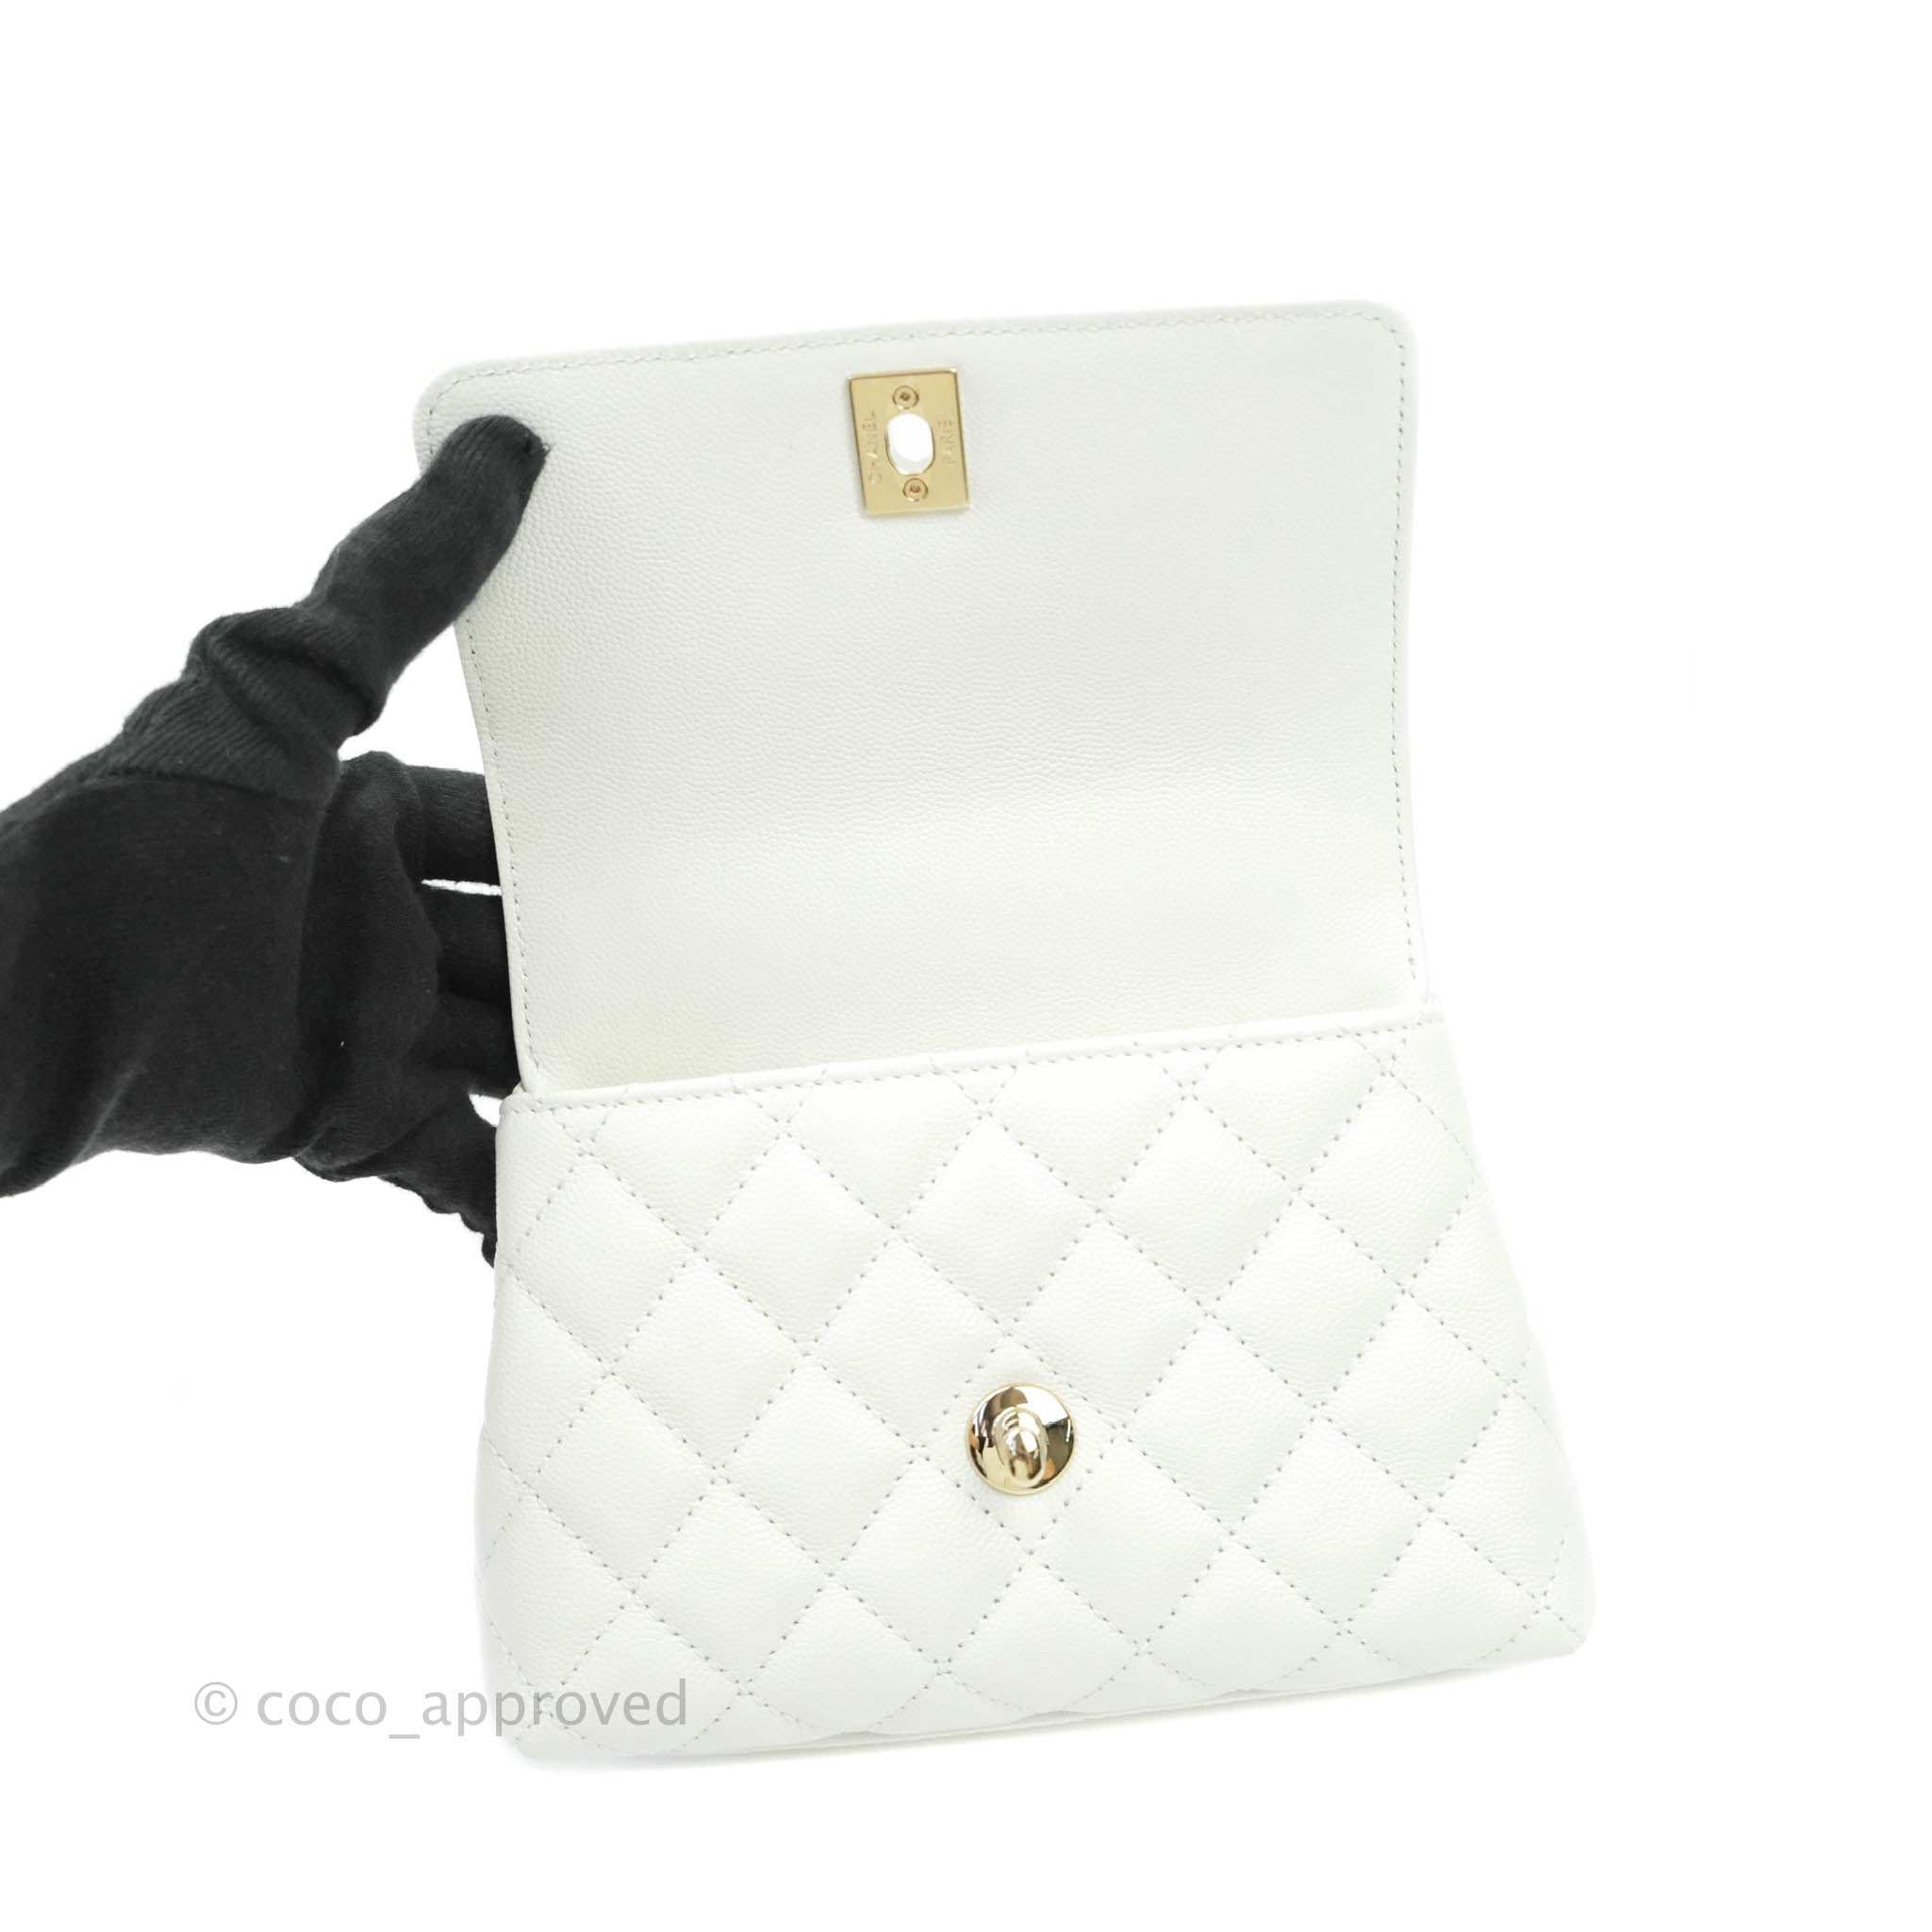 CHANEL Caviar Quilted Small Coco Handle Flap White 1270896